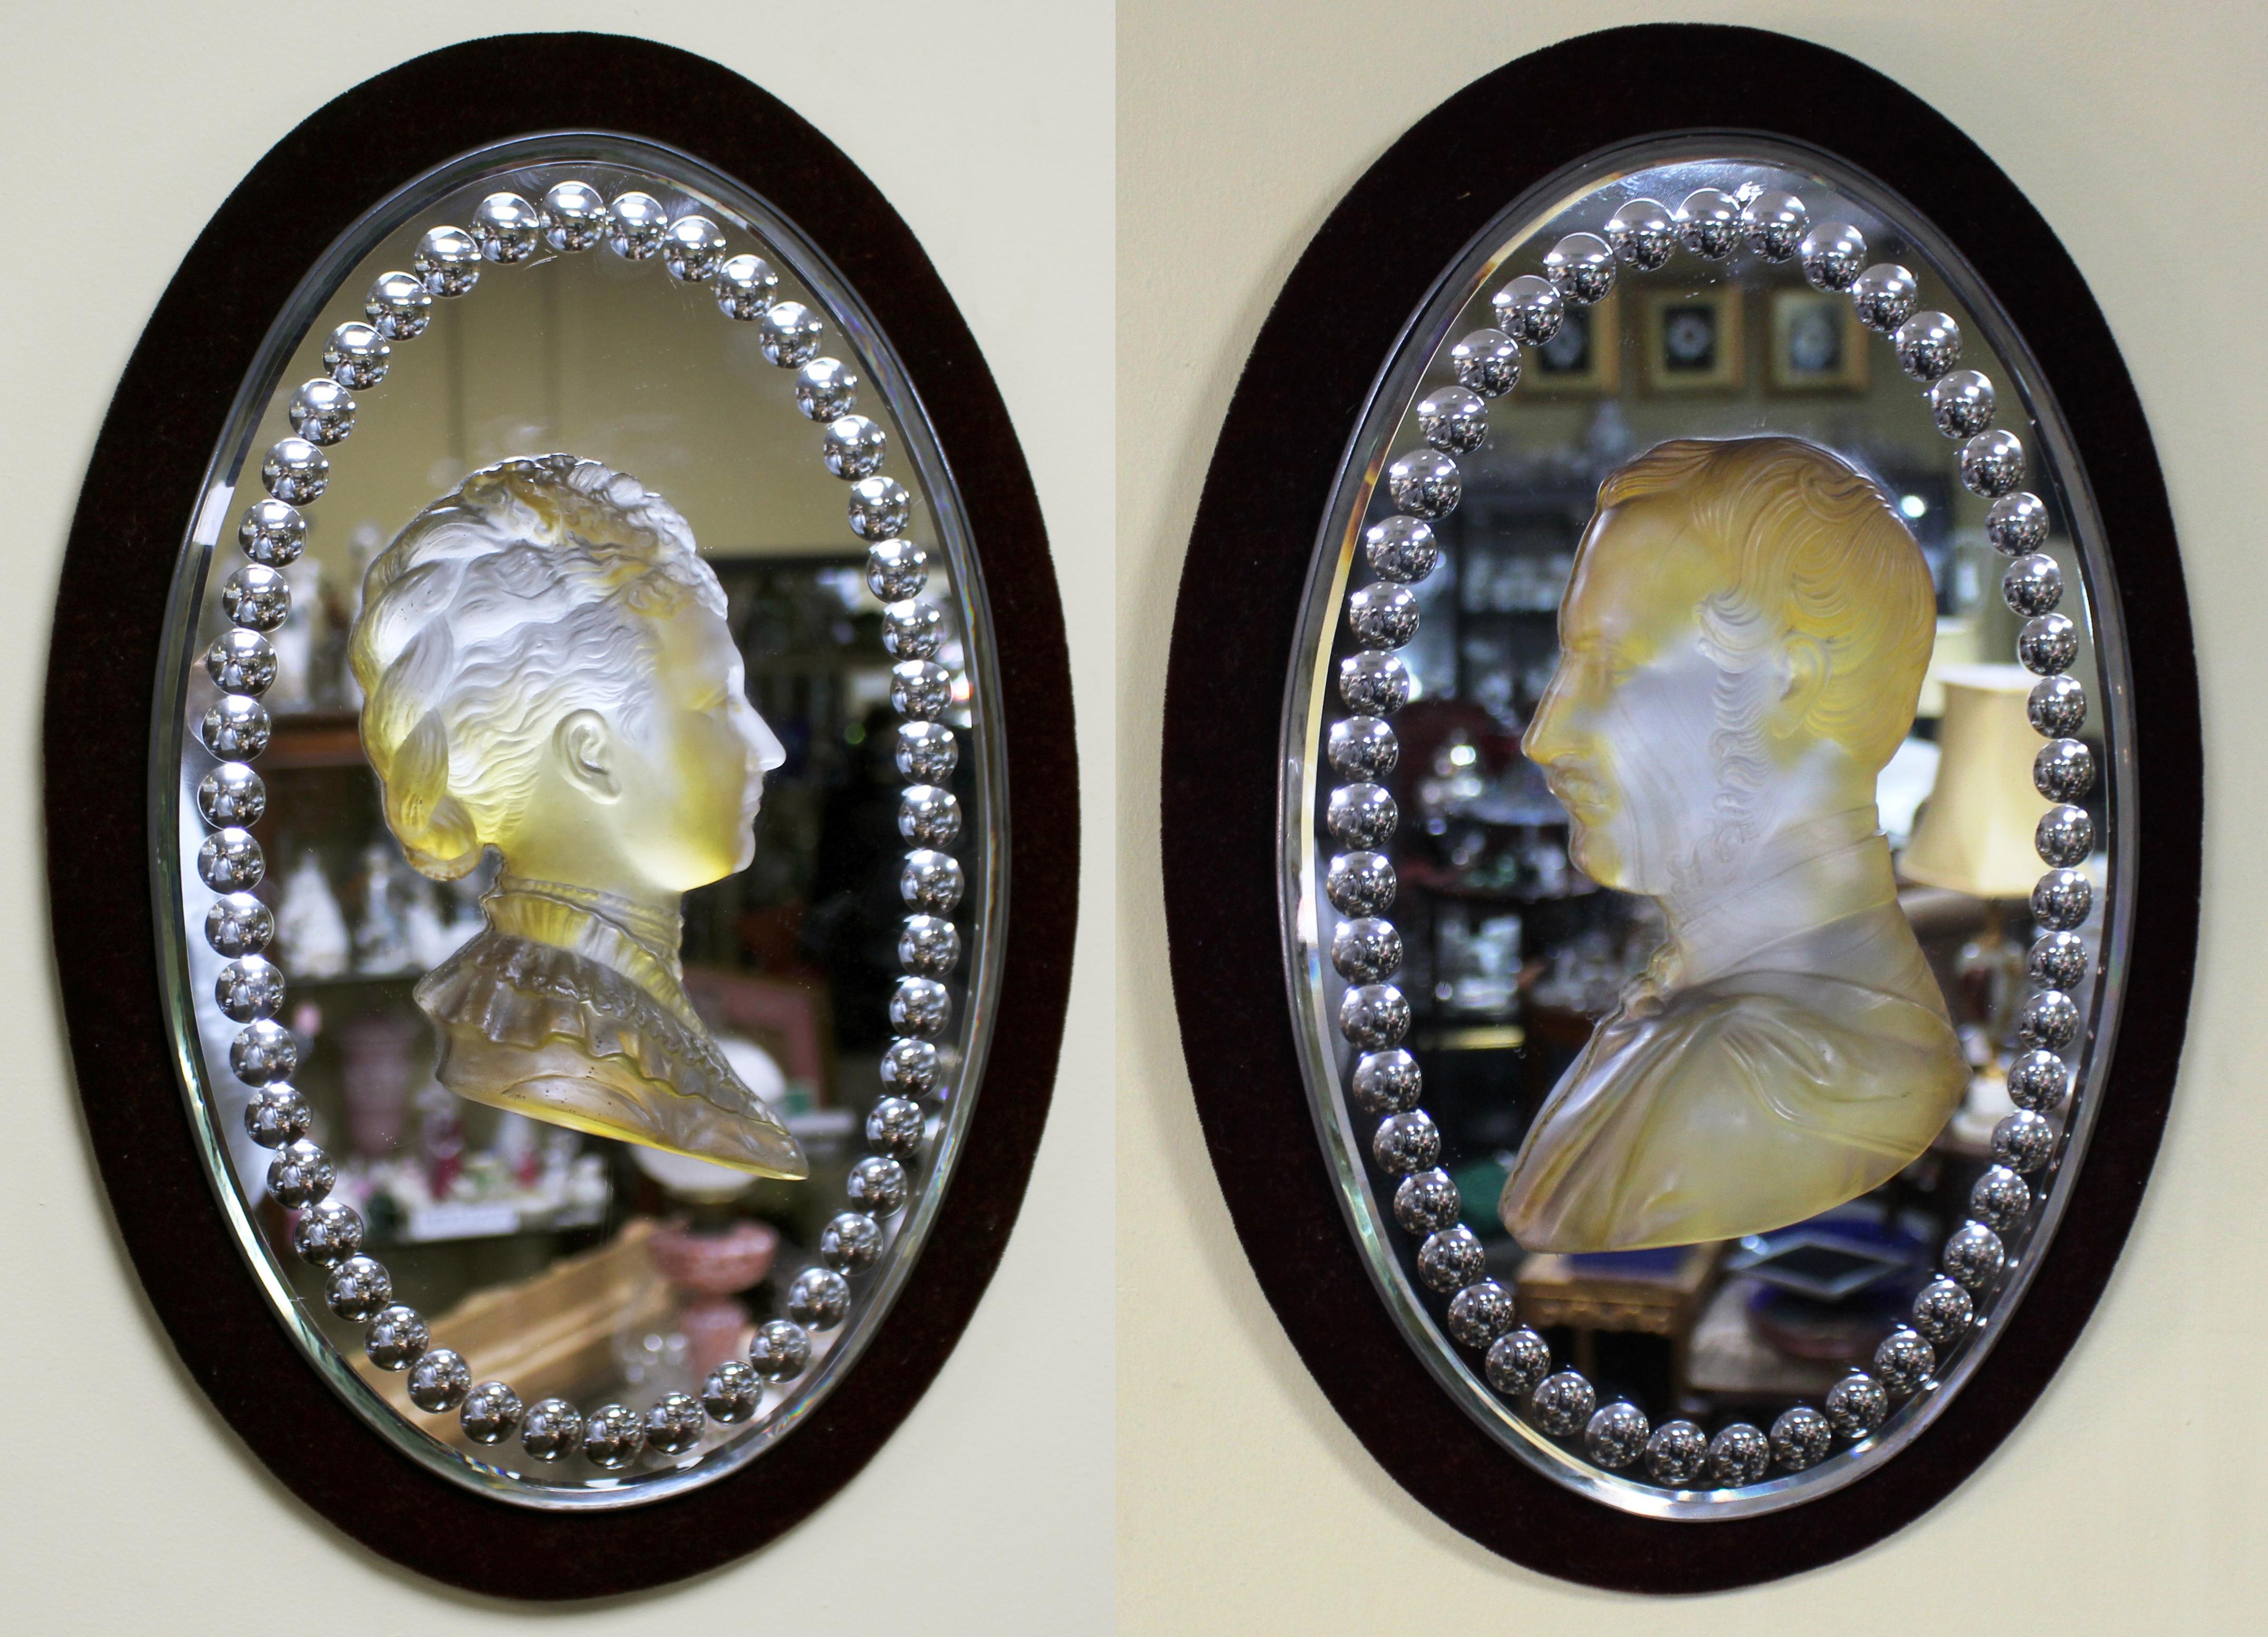 Pair of mid 19th c. Victoria & Albert carved crystal mirrored plaques


Period mid 19th c.

Size 32 x 47 cm / 12 1/2 x 18 1/2 in

Very good condition. Old glue can be seen through the carved crystal silhouettes. Fully original
 

Carved